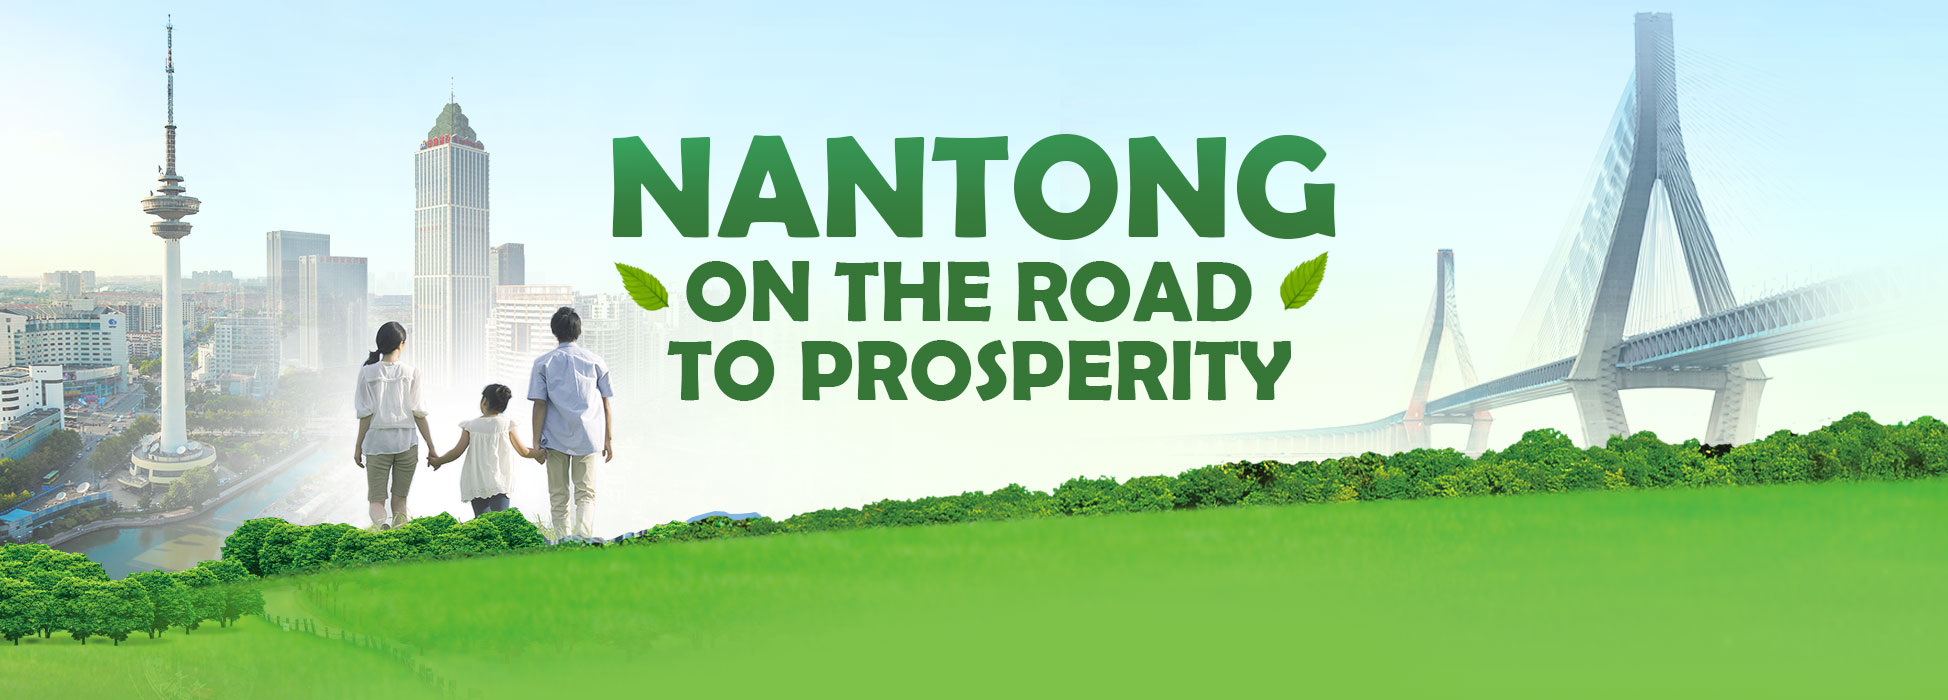 Nantong on the road to prosperity